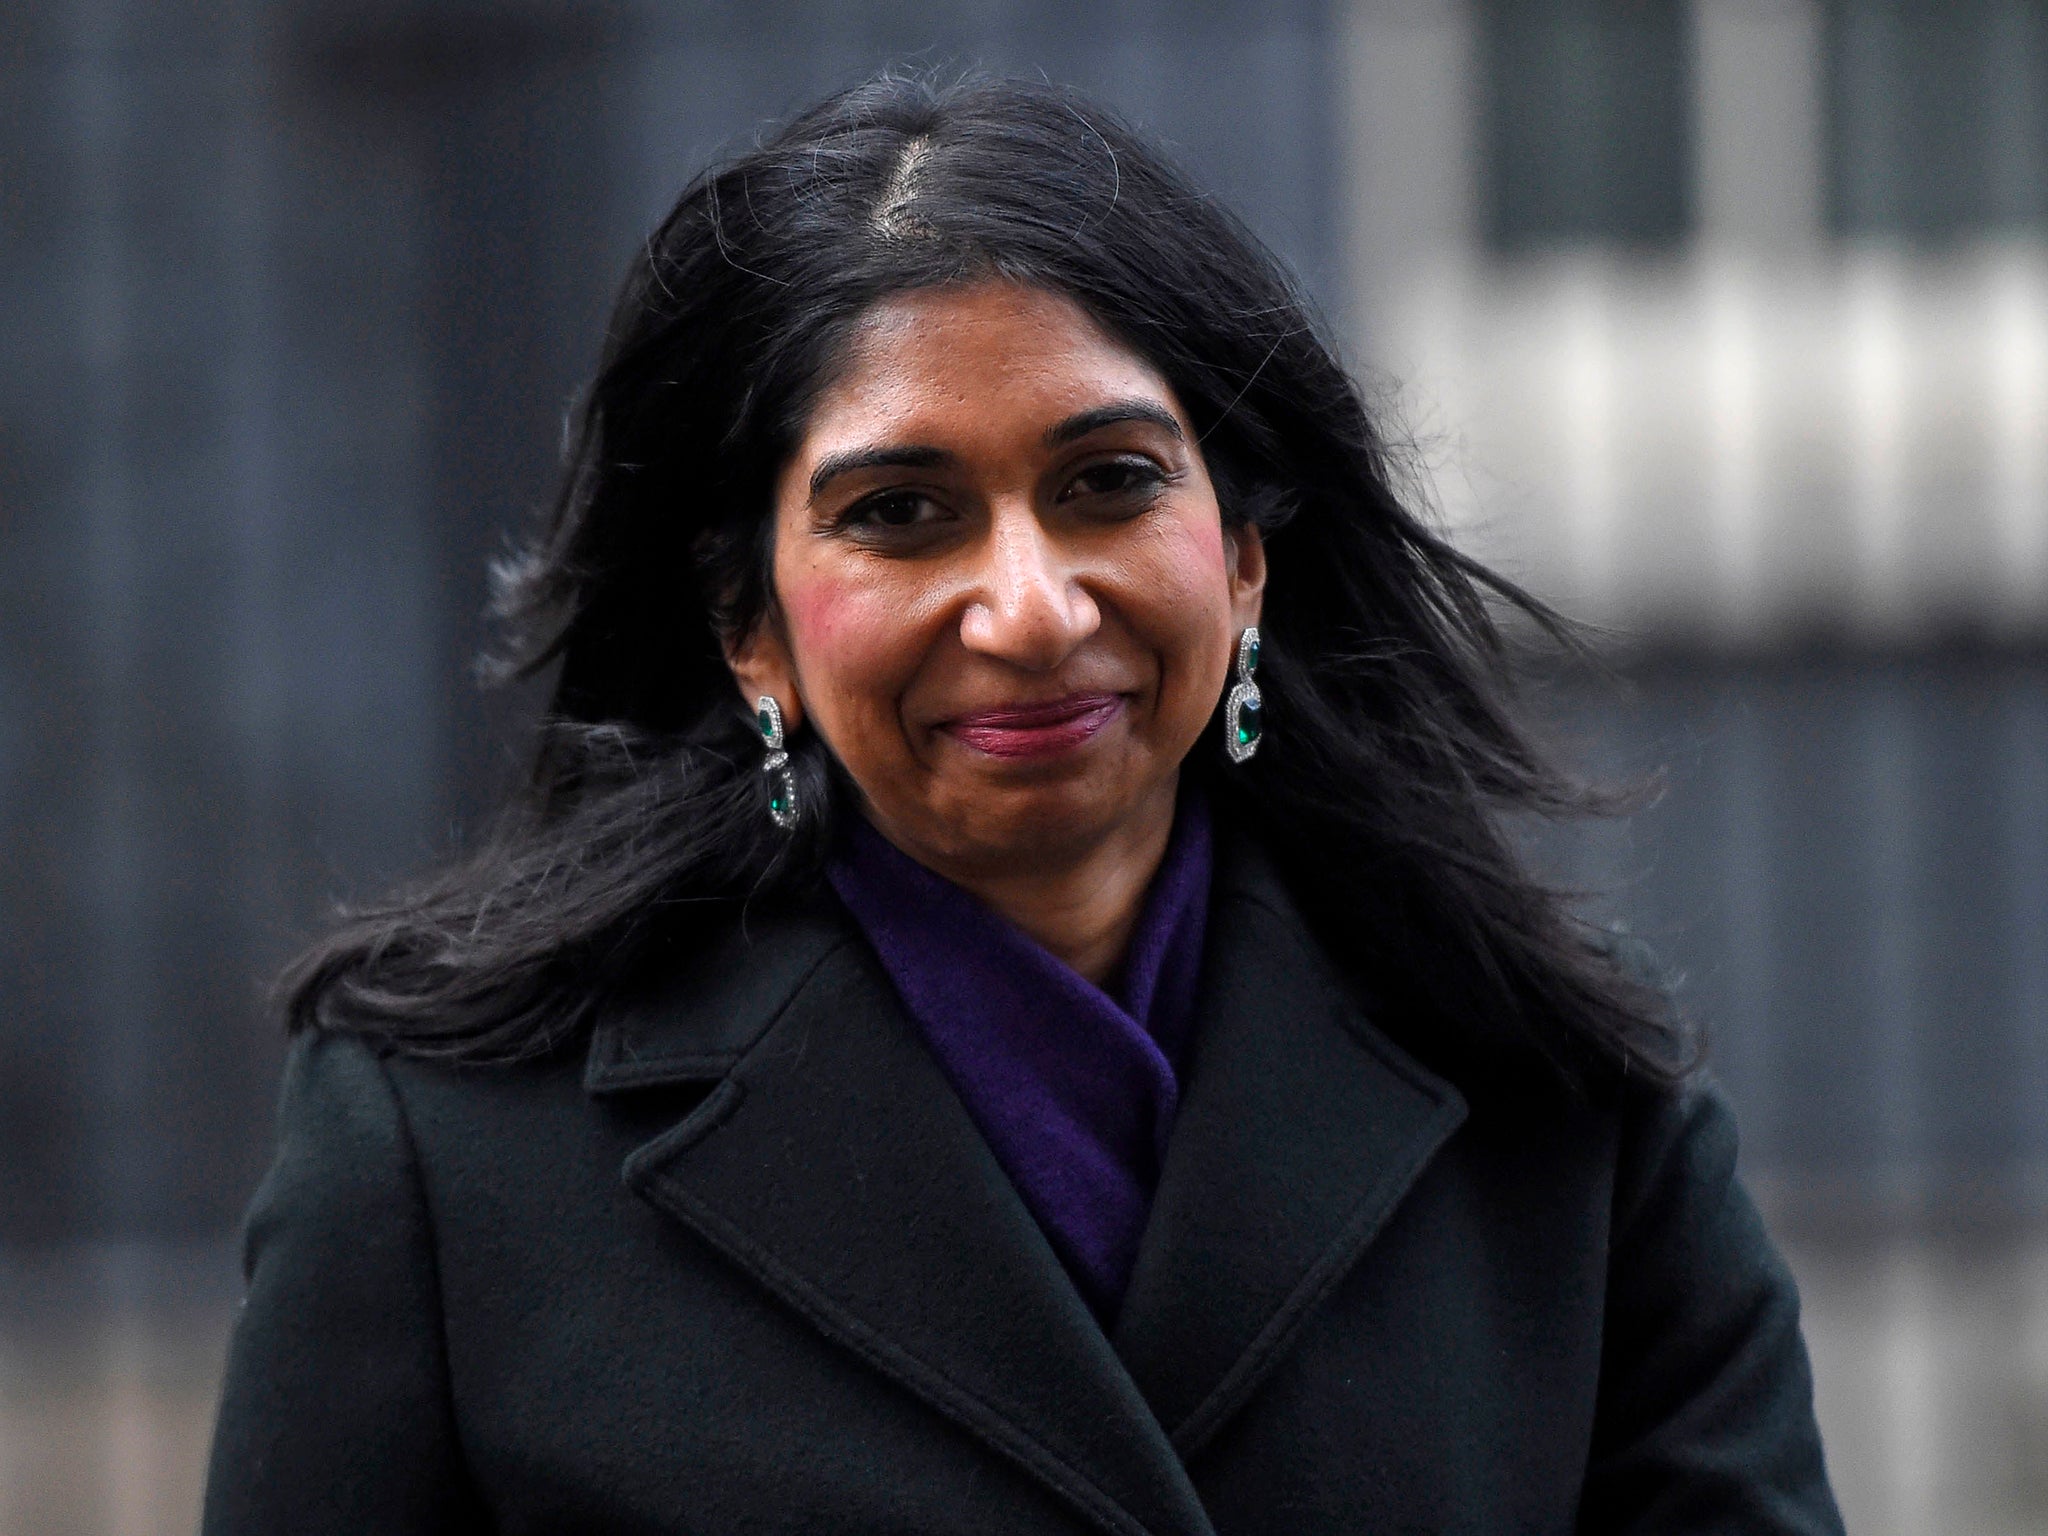 Ministers are due to reform the law so Suella Braverman, the attorney general, is able to take six months' leave